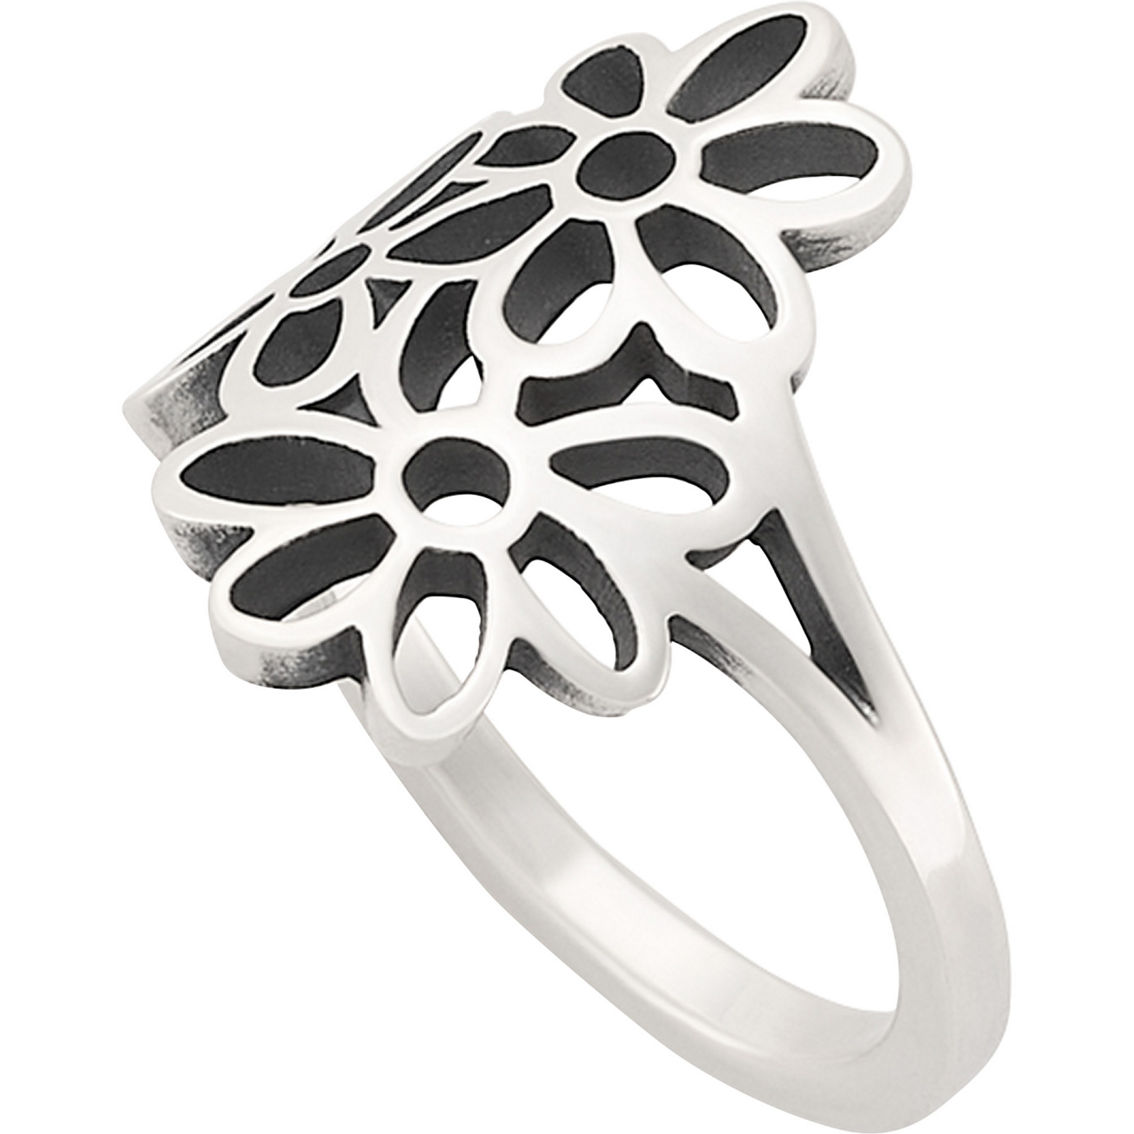 James Avery Sterling Silver Open Floral Ring - Image 3 of 3